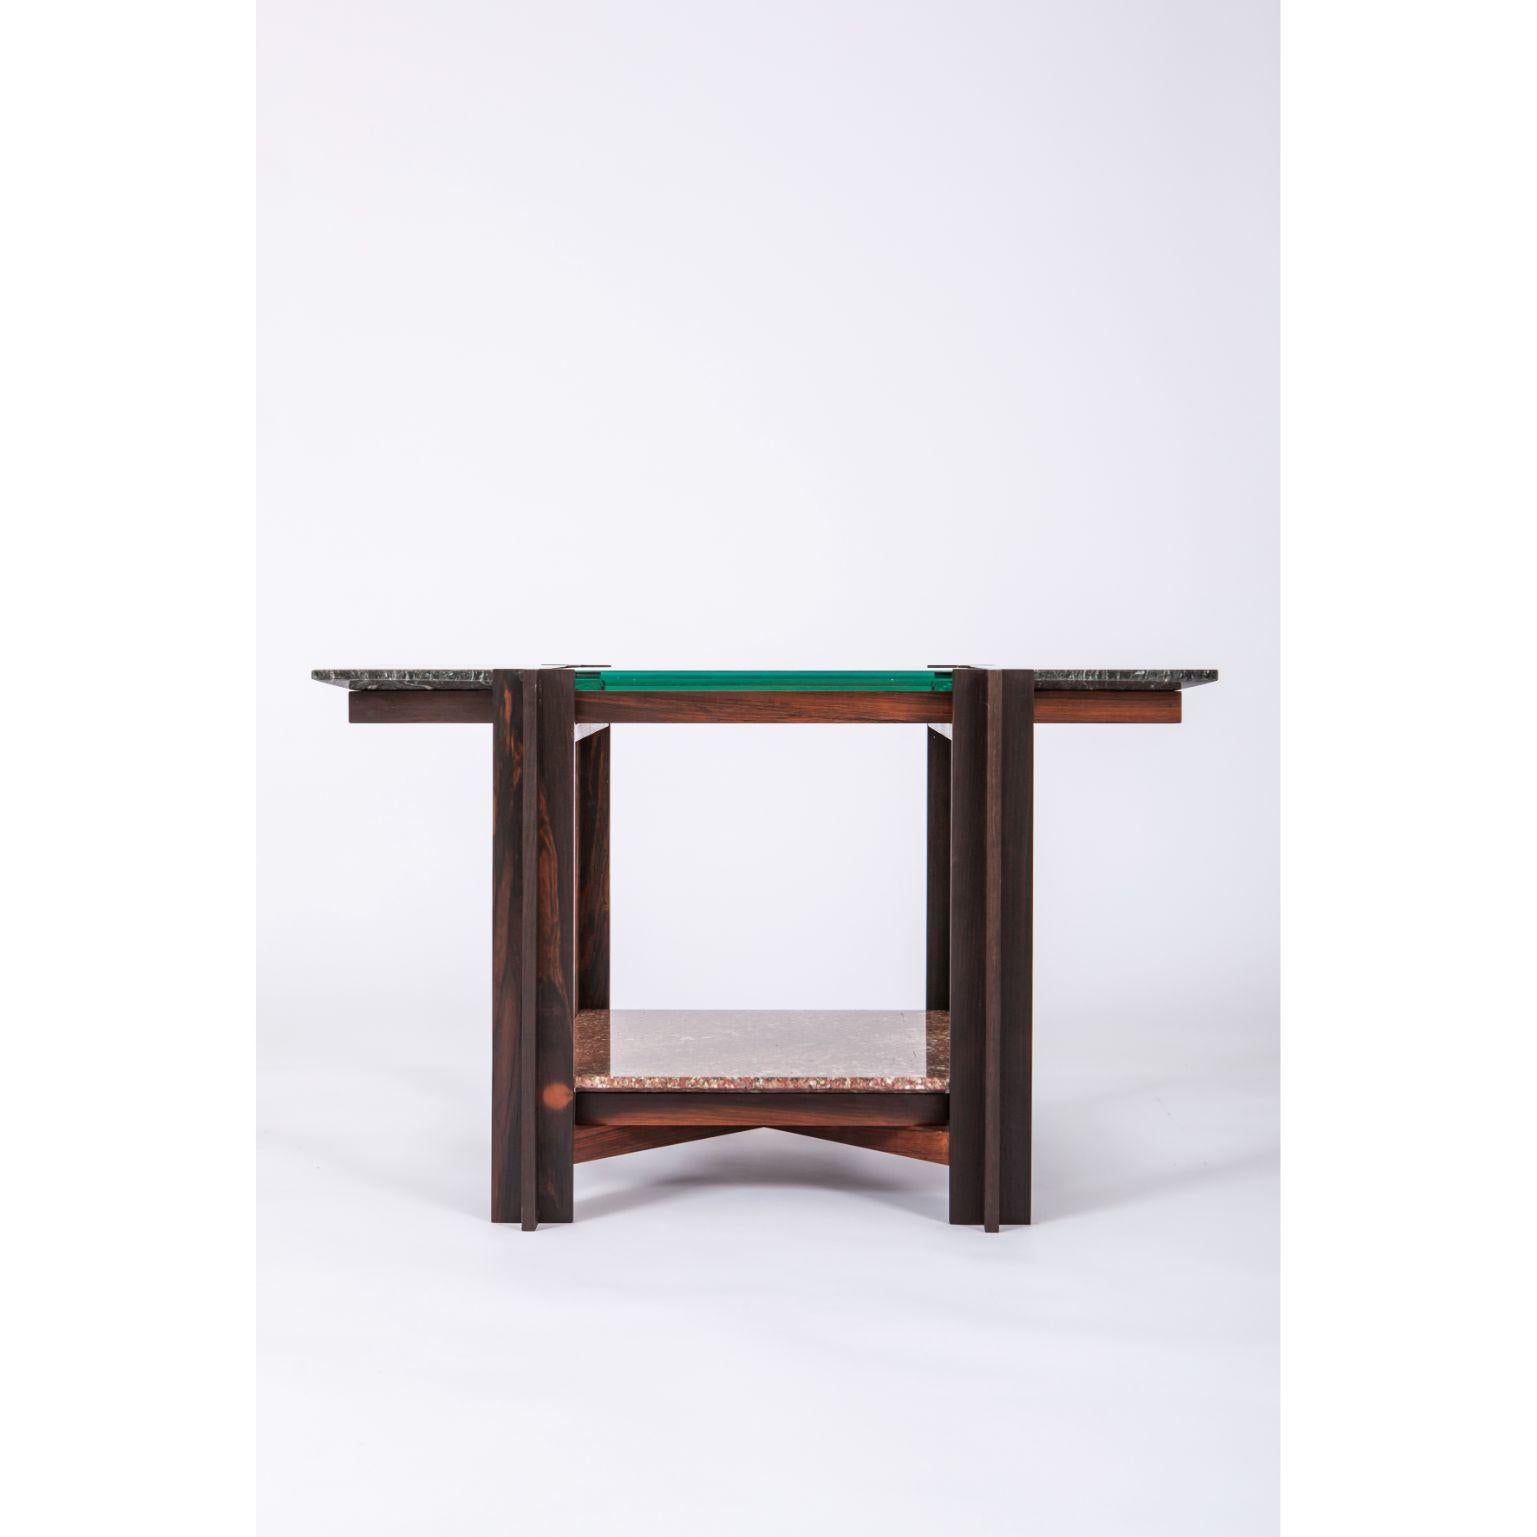 Mais - dark Freijo table with tabs - by Alva Design
Materials: Natural or darkened Freijó + glass + granite (floral sandblasted green)
Dimensions: 83 x 49 x 50 cm

Alva is a furniture and objects design office, formed by brothers Susana Bastos,